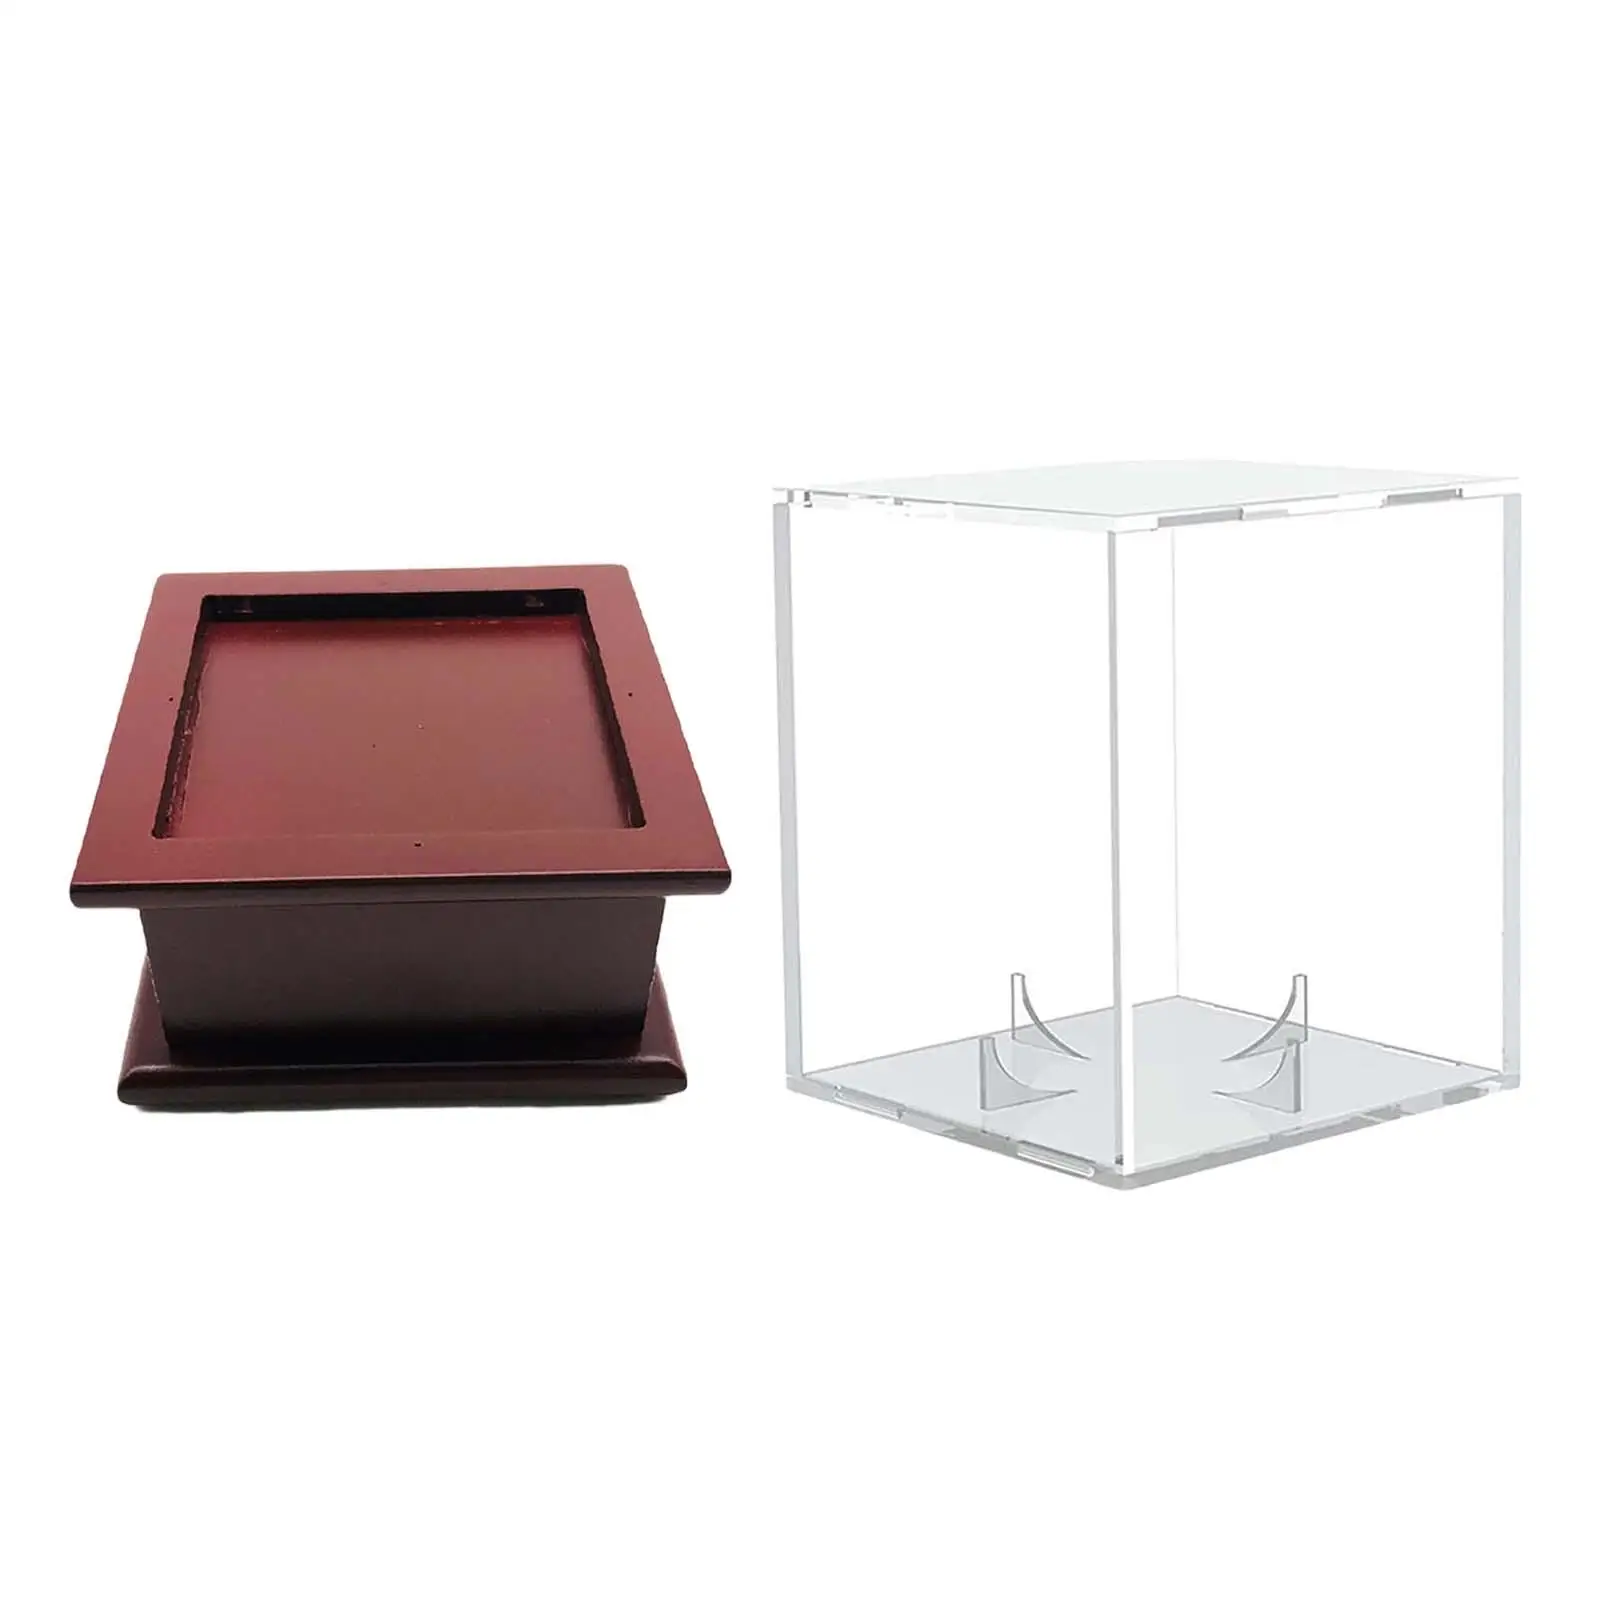 Acrylic Storage Box, Display Box, Dustproof Protection clear Display, Display Box, for Collectibles Official Size Ball